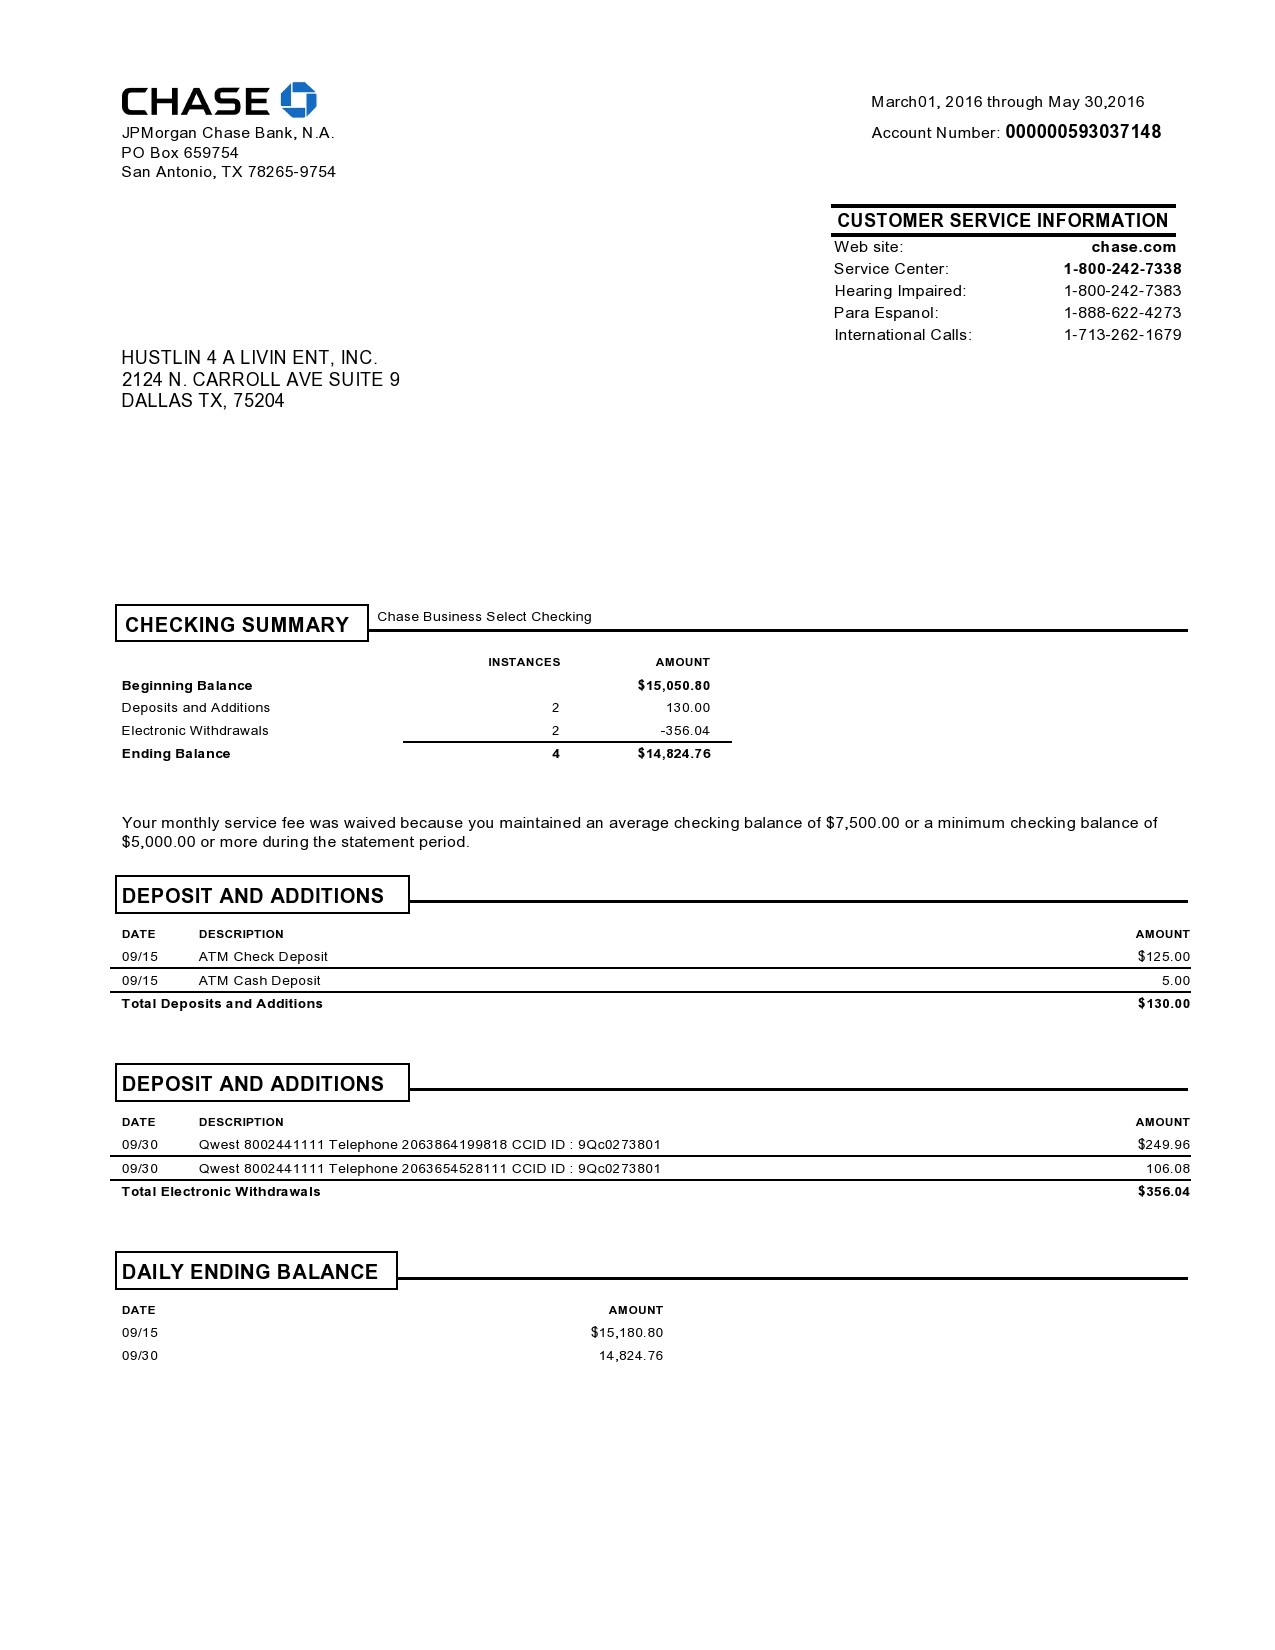 bank-of-america-business-bank-statement-template